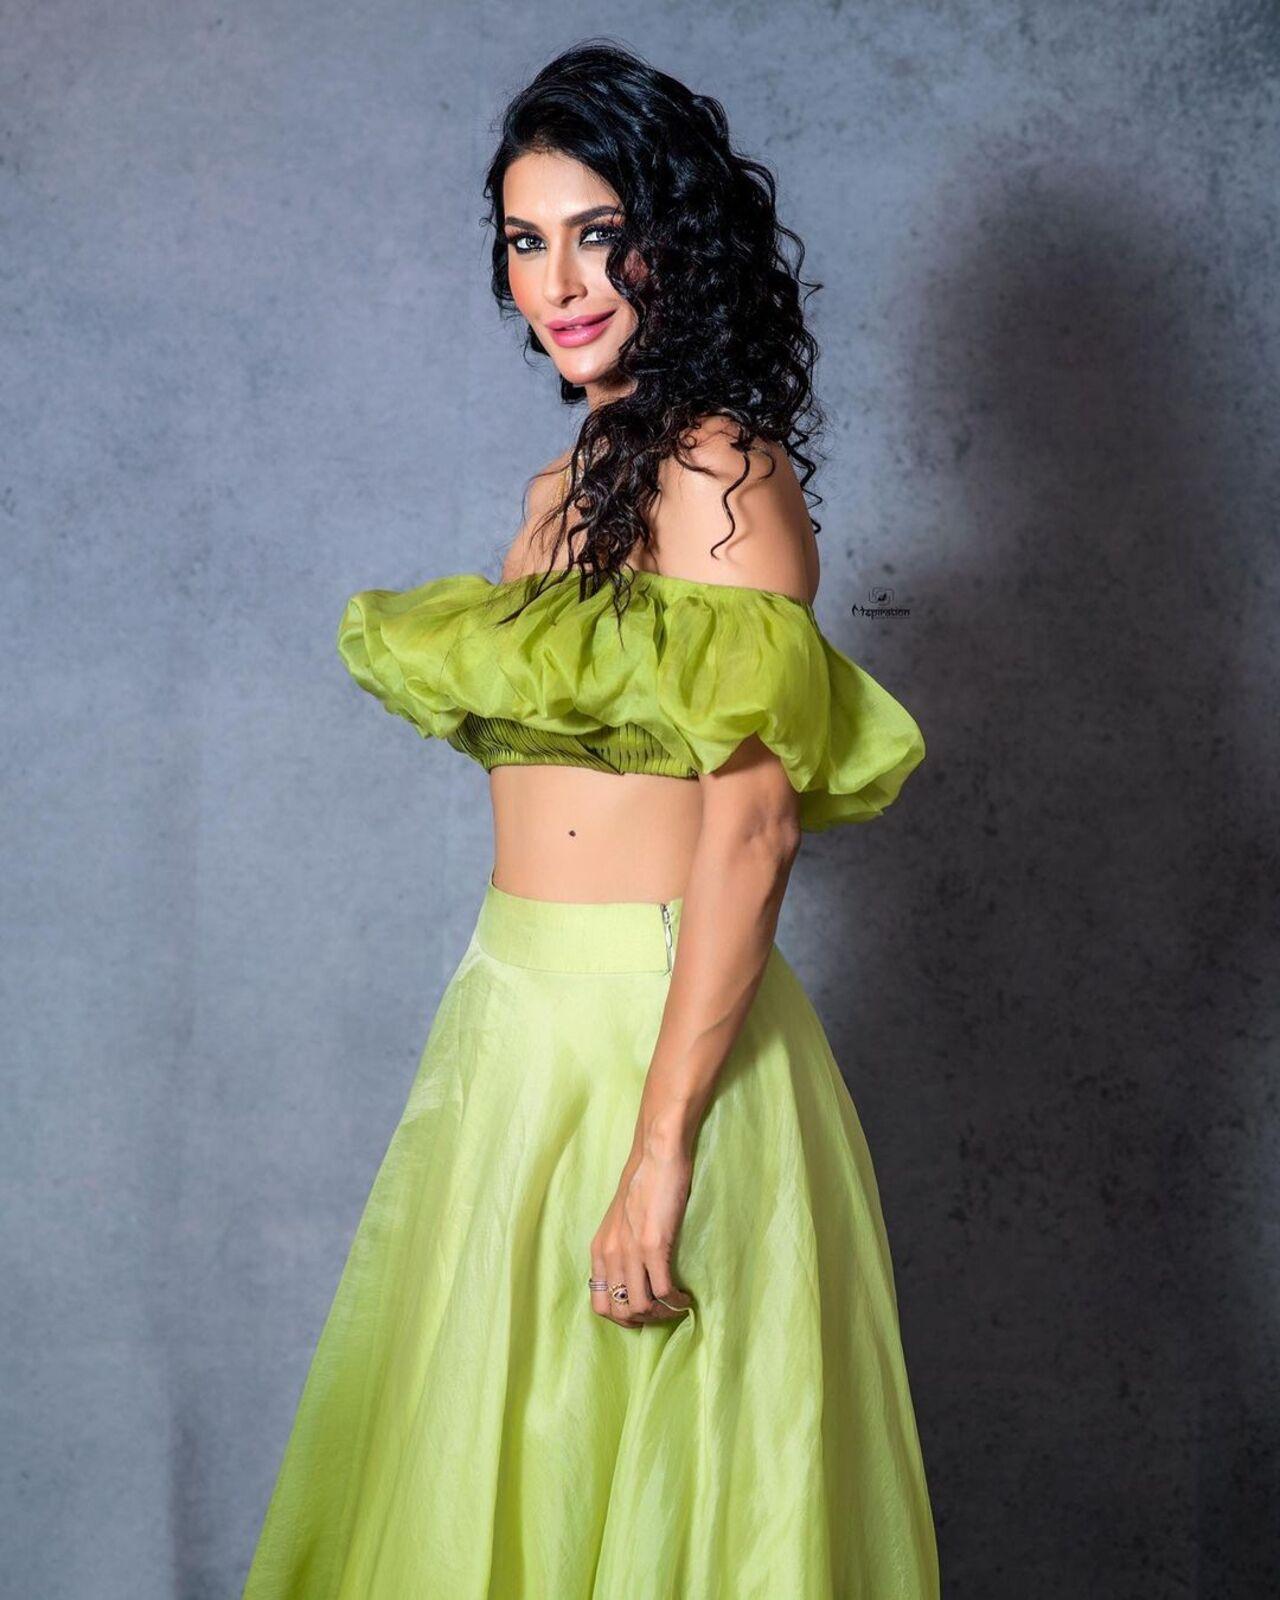 For this look, Pavitra wore a green crop top with a matching long skirt